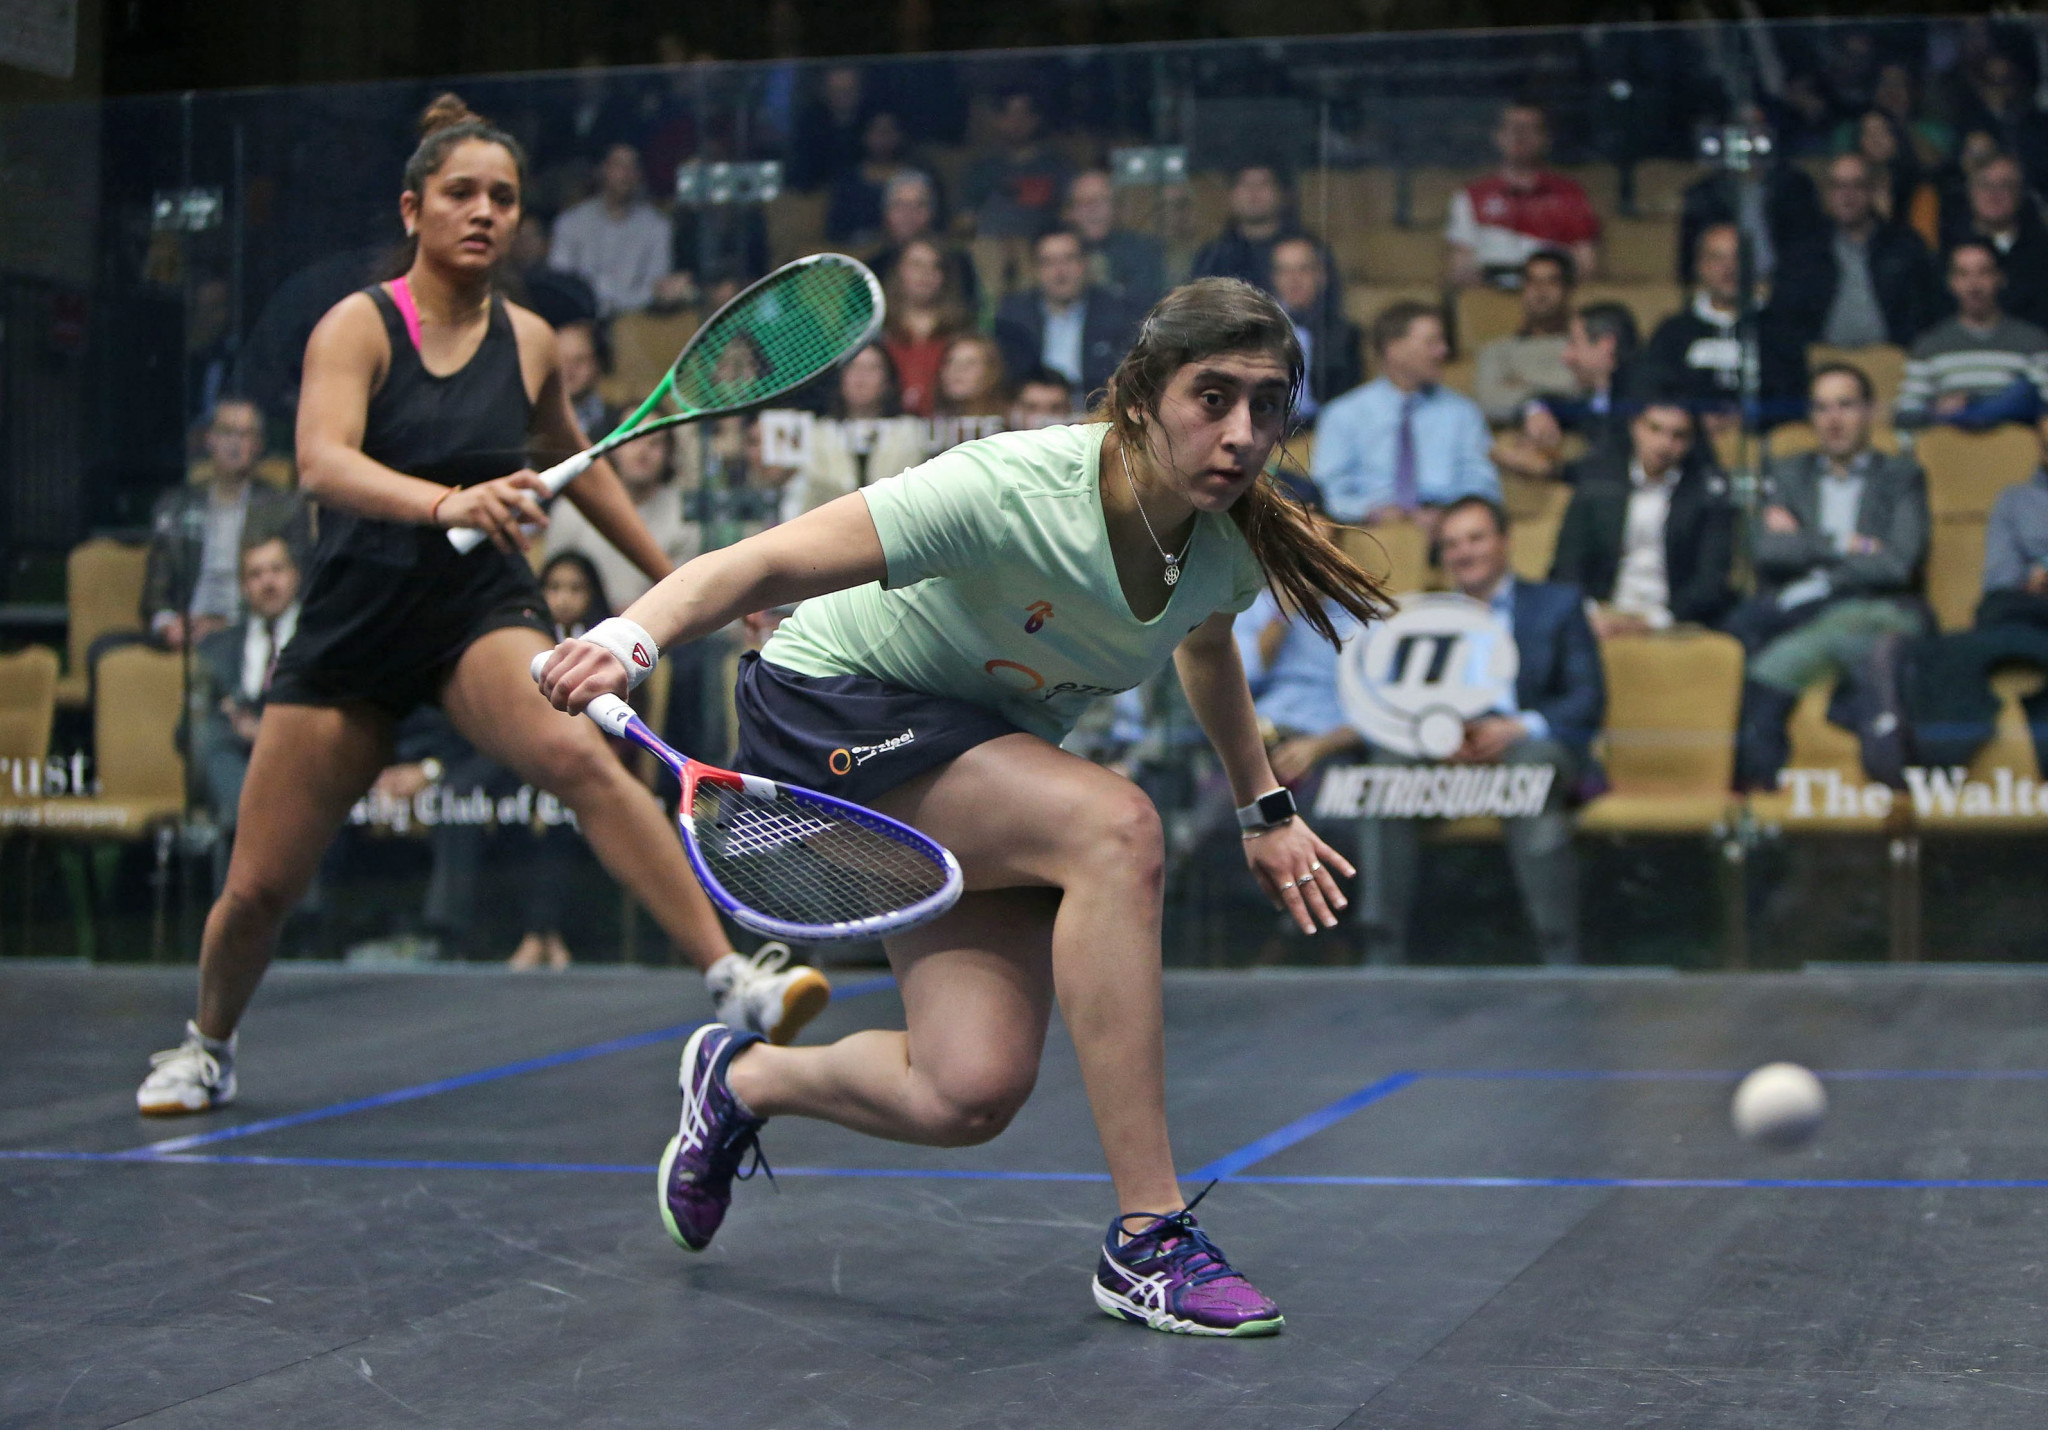 High seeds untroubled on opening day of PSA Windy City Open